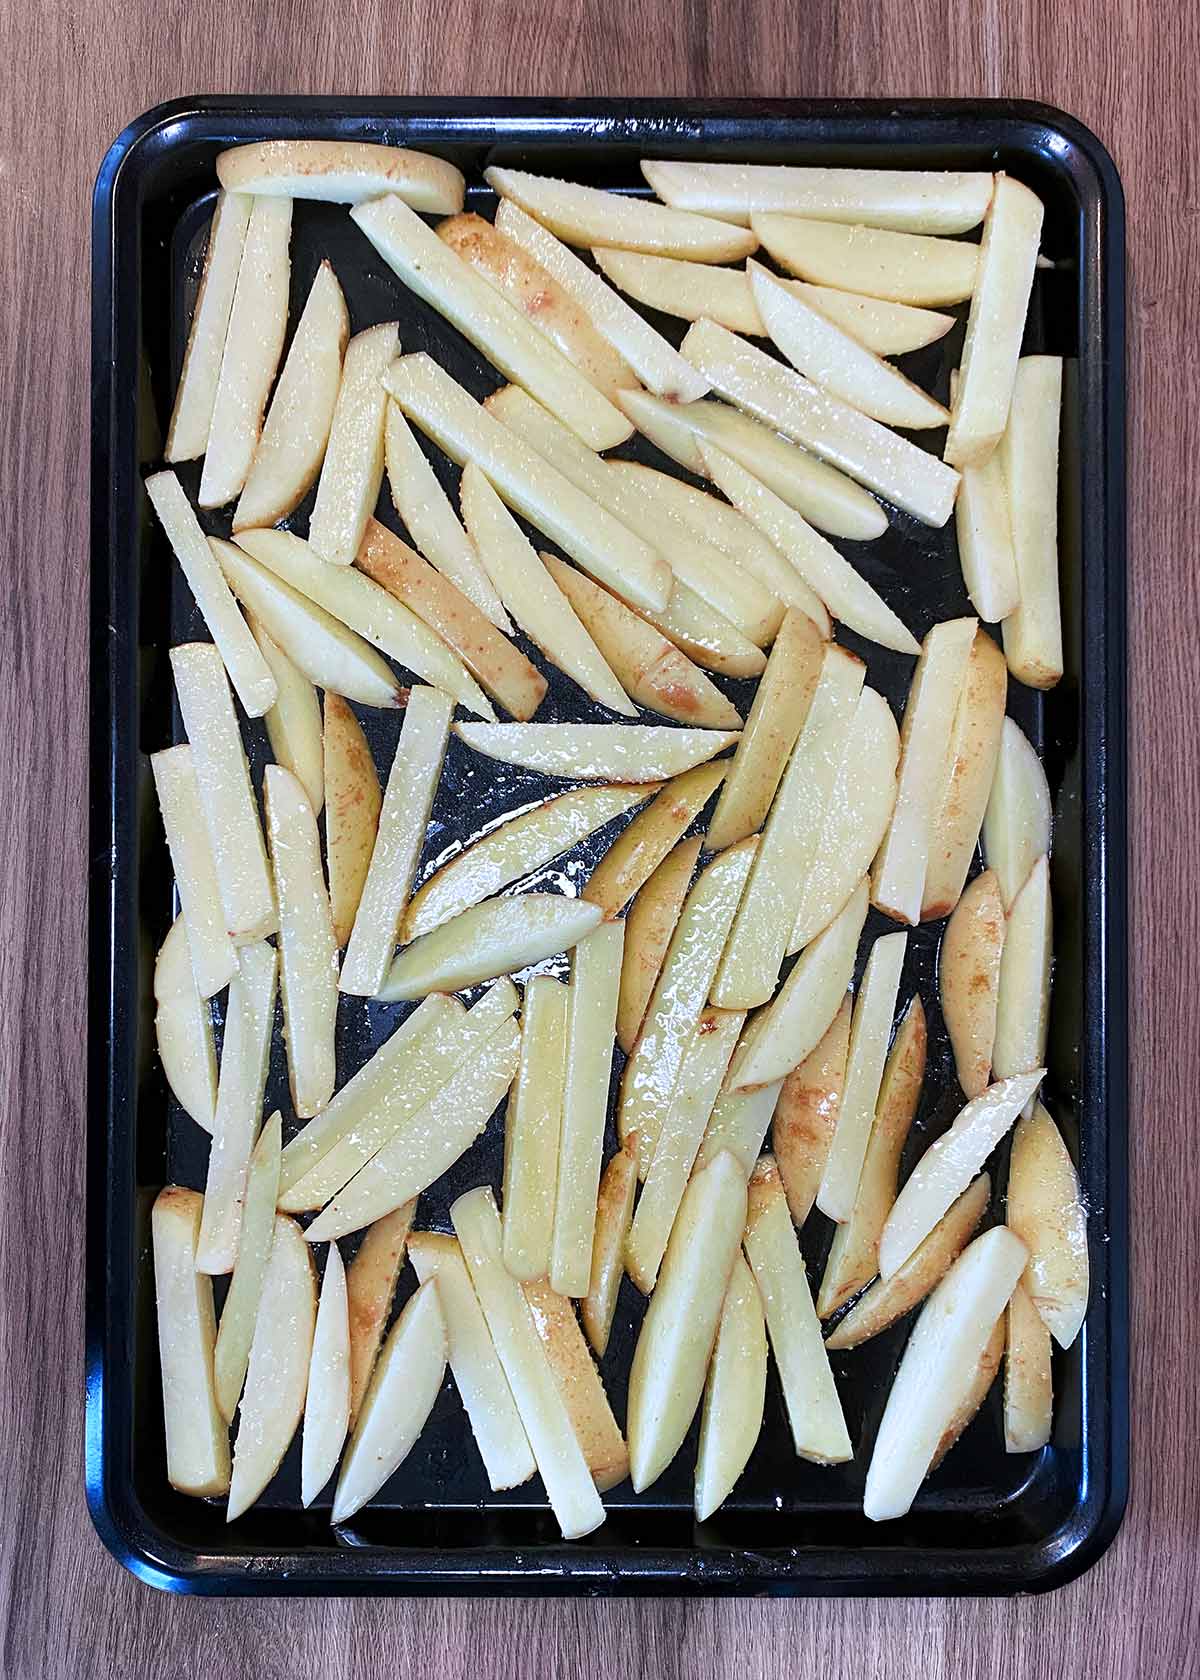 Uncooked chips laid out on a baking tray.